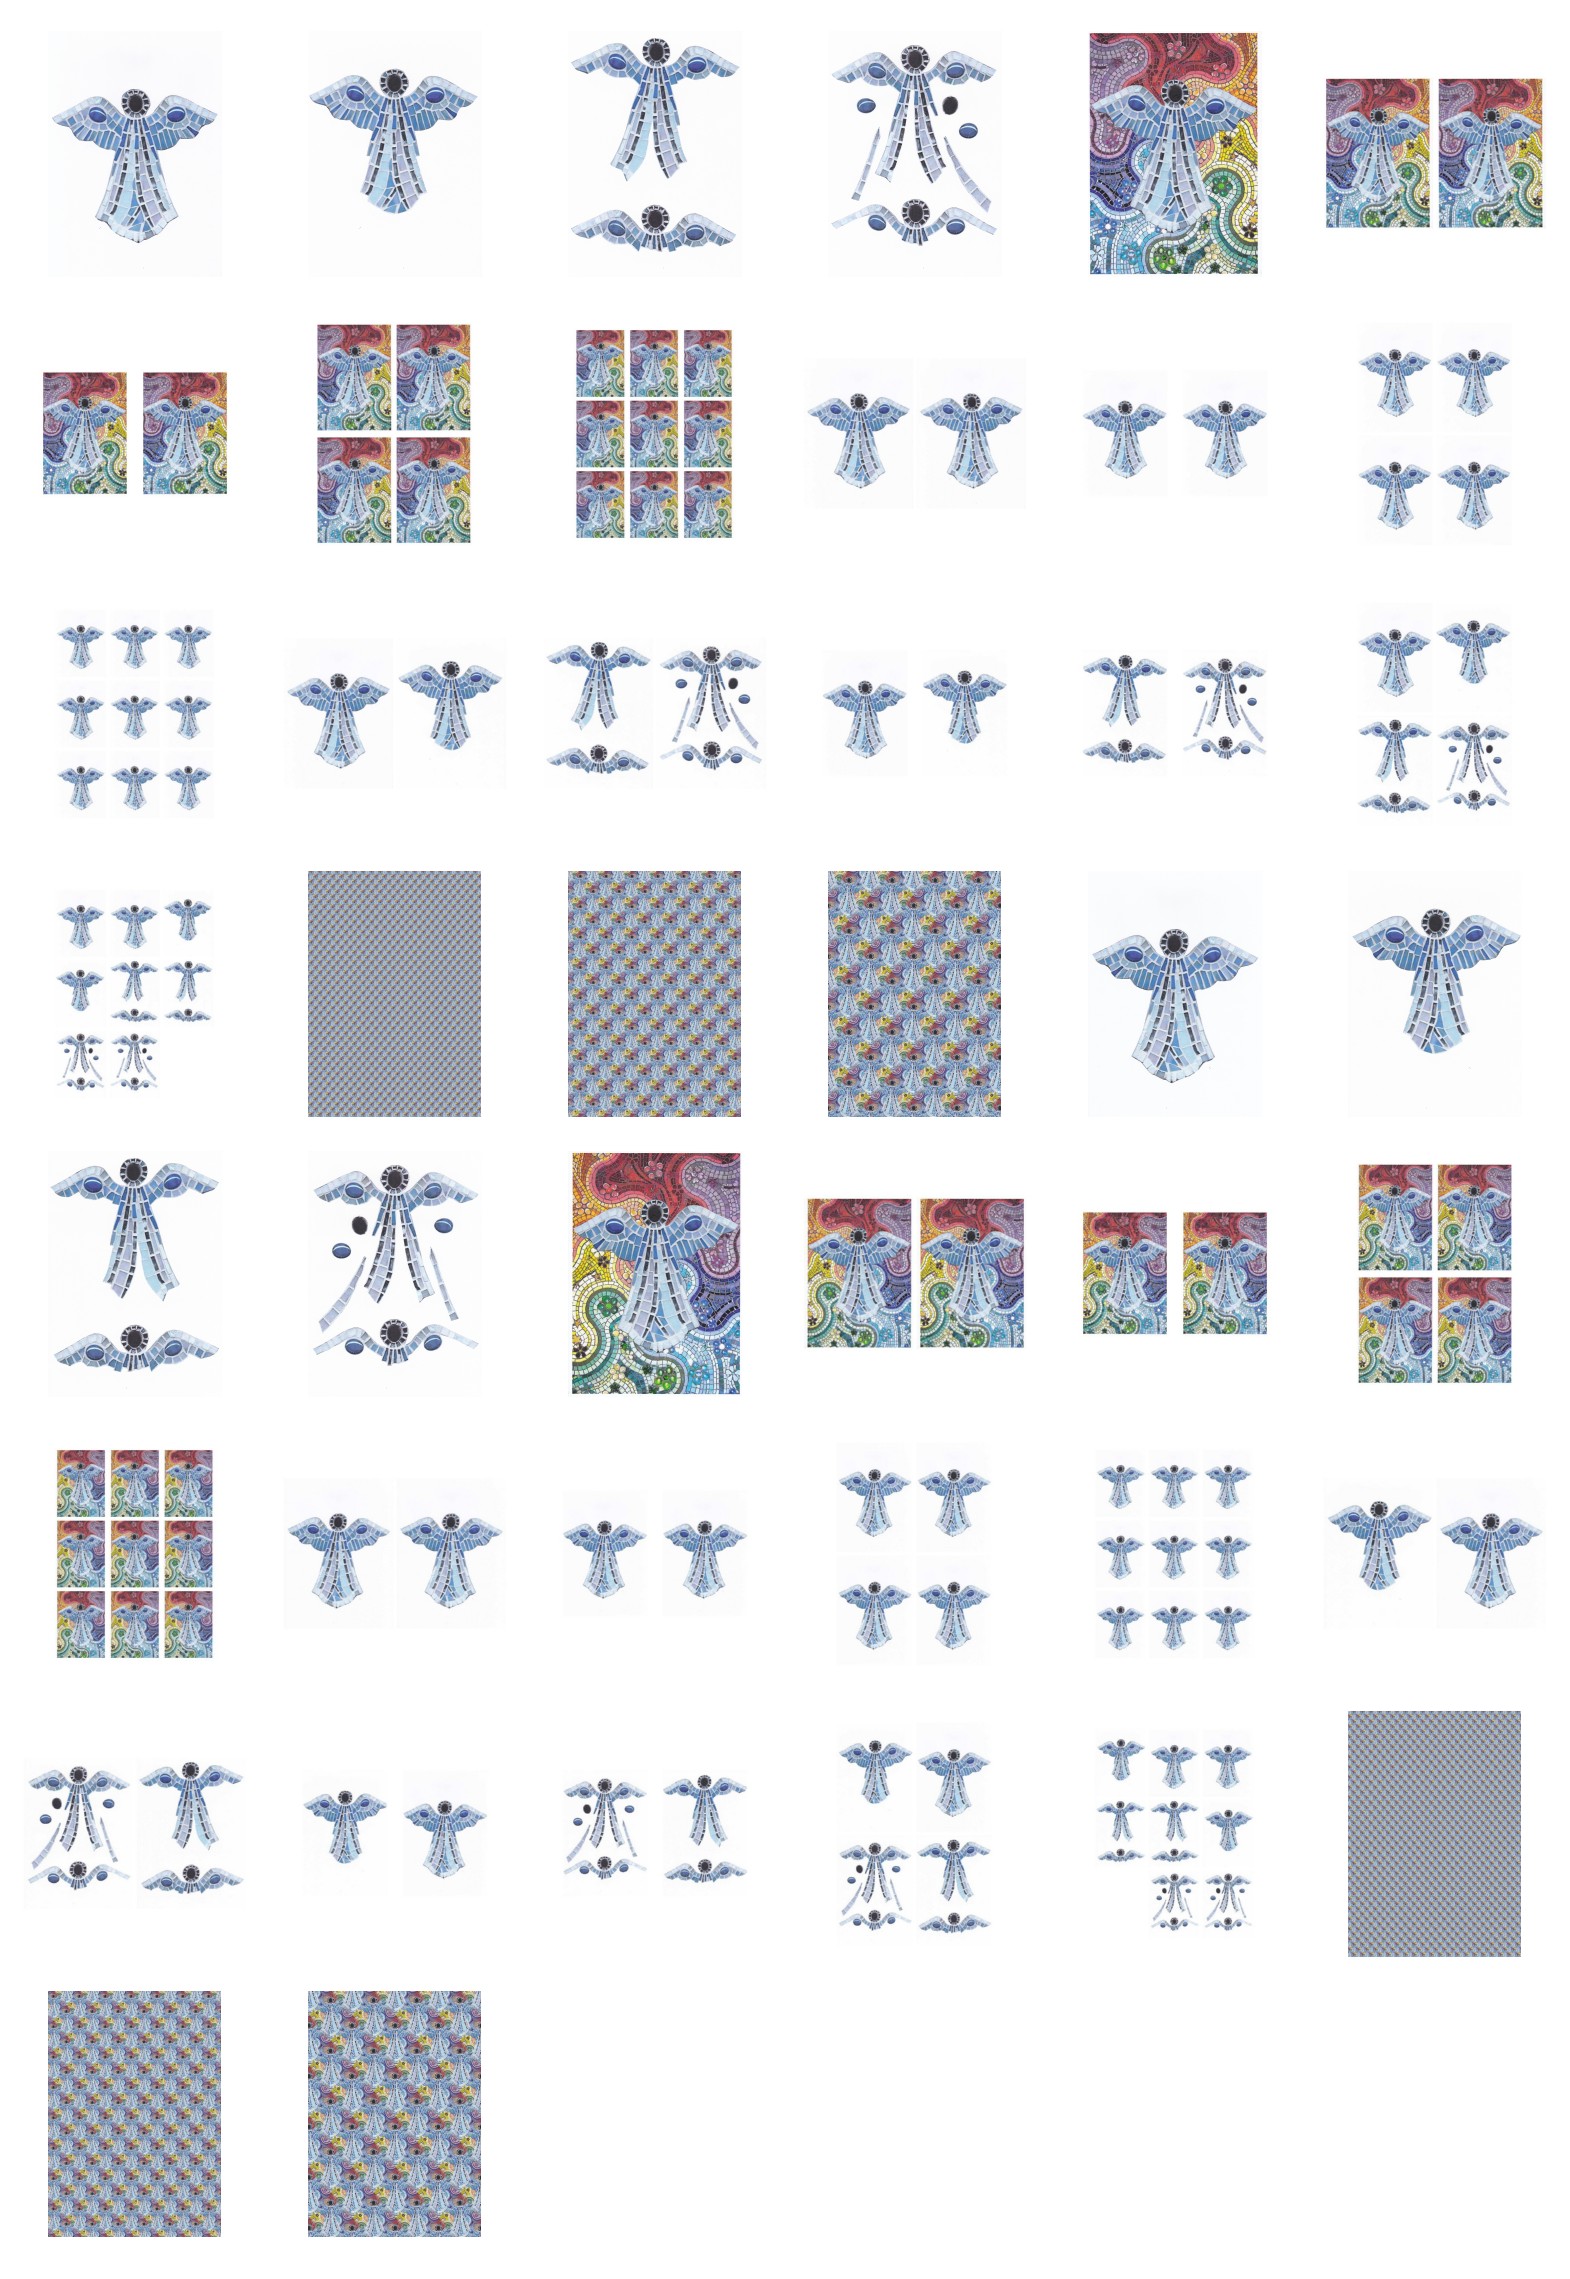 Angel Mosaic Set 03 - 44 Pages to Download